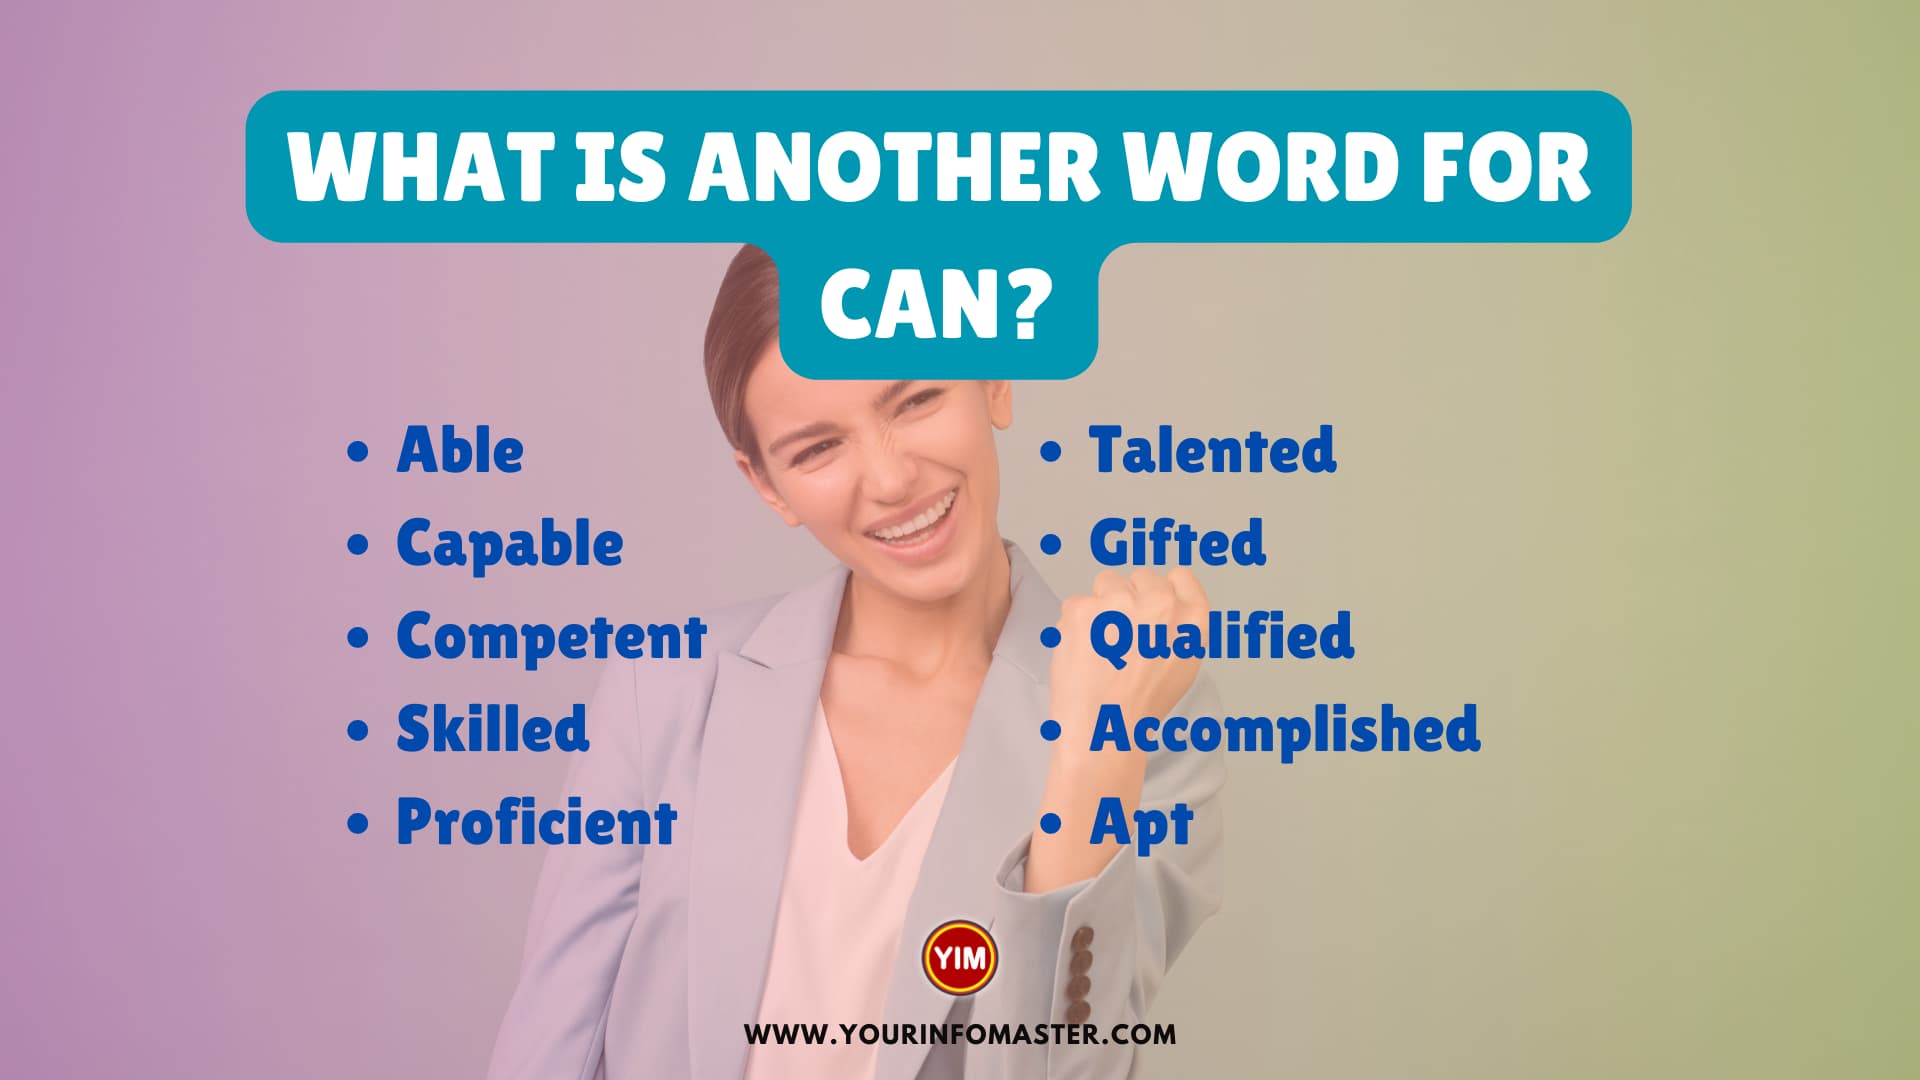 What is another word for Can